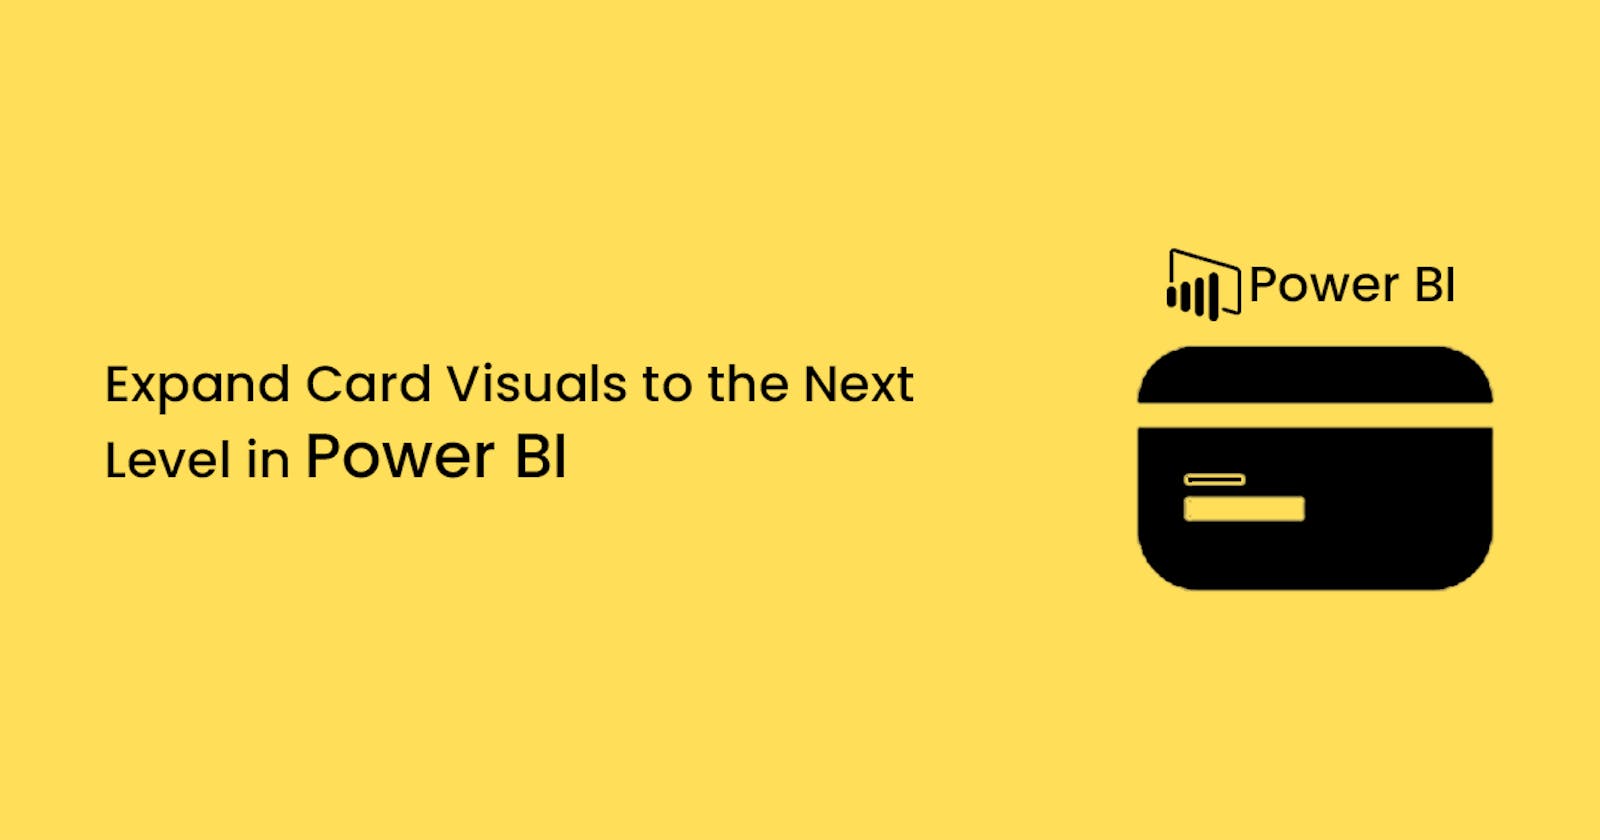 Expand Card Visuals to the Next Level in Power BI